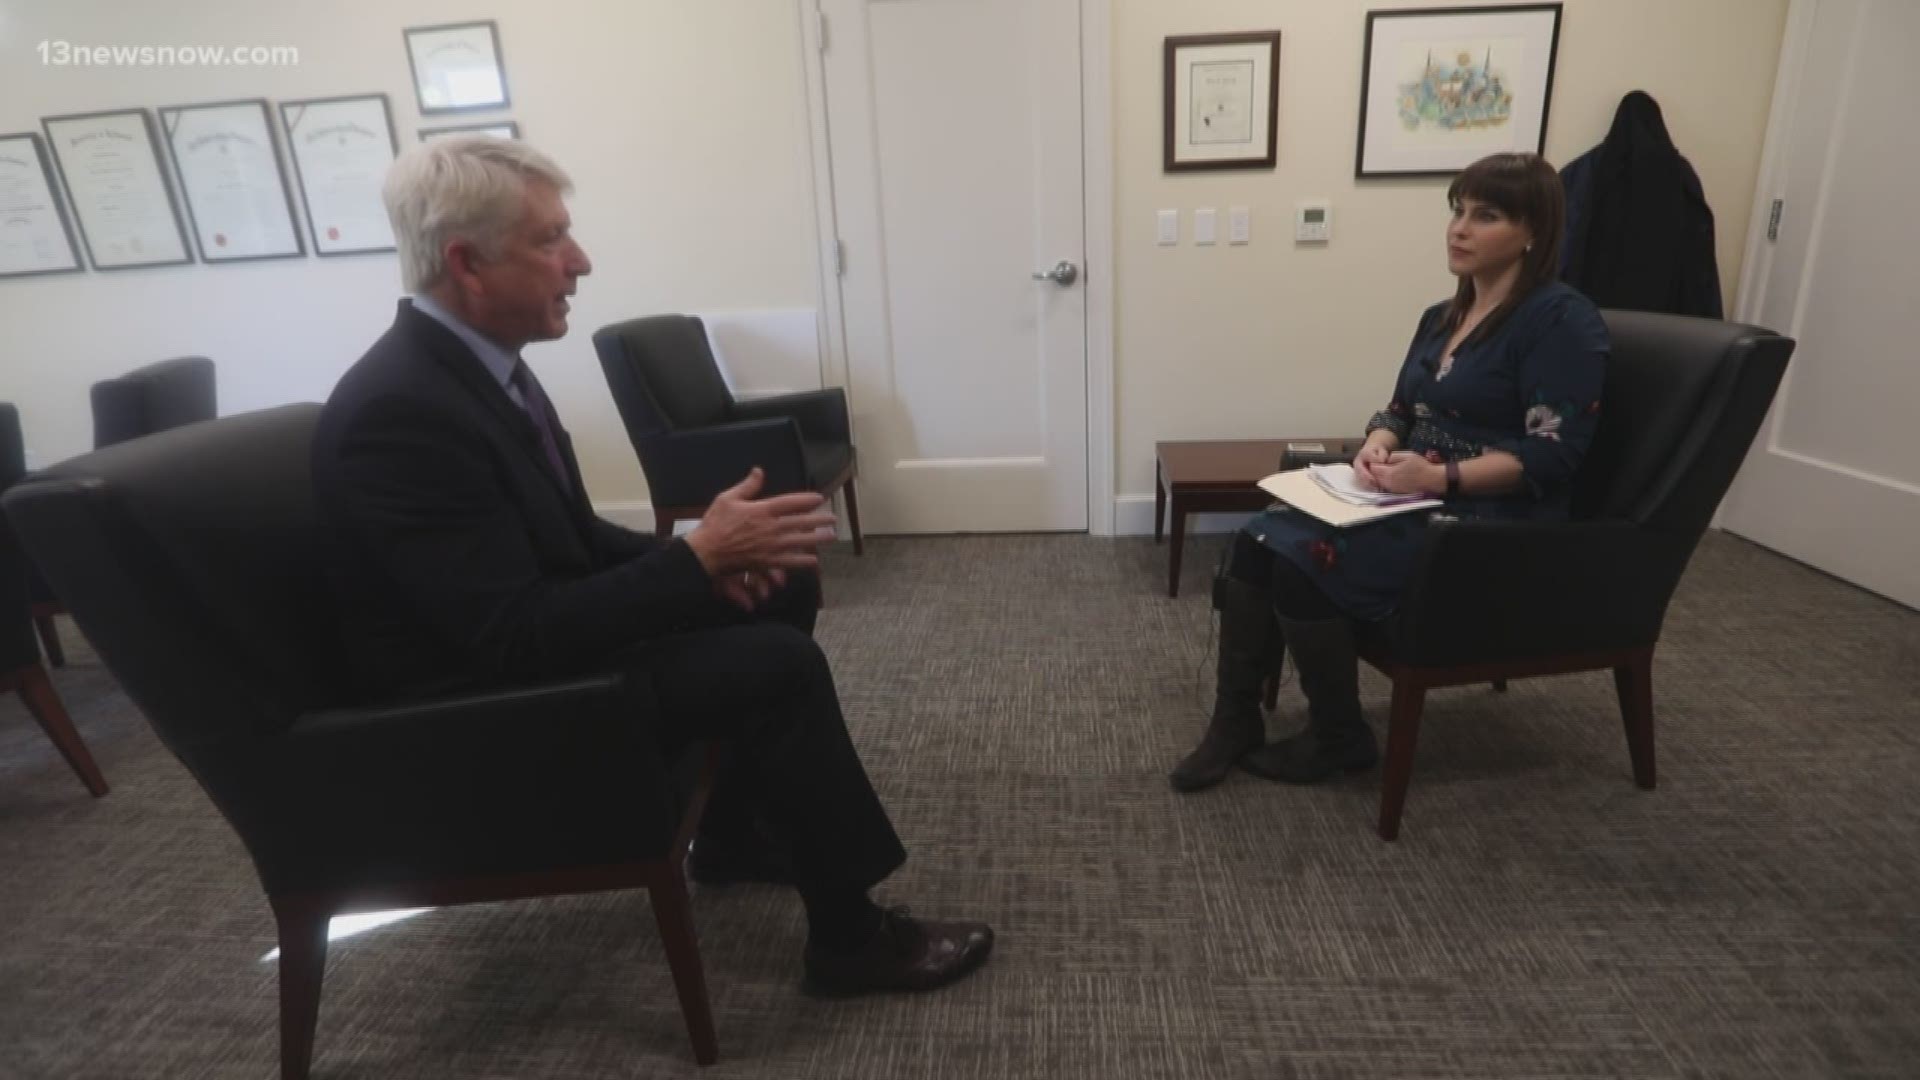 Virginia's Attorney General Mark Herring said robocalls are getting worse. A 13News Now investigation uncovers the latest data on these spam calls. We take the issue to state leaders to find out what they're working on to protect citizens.